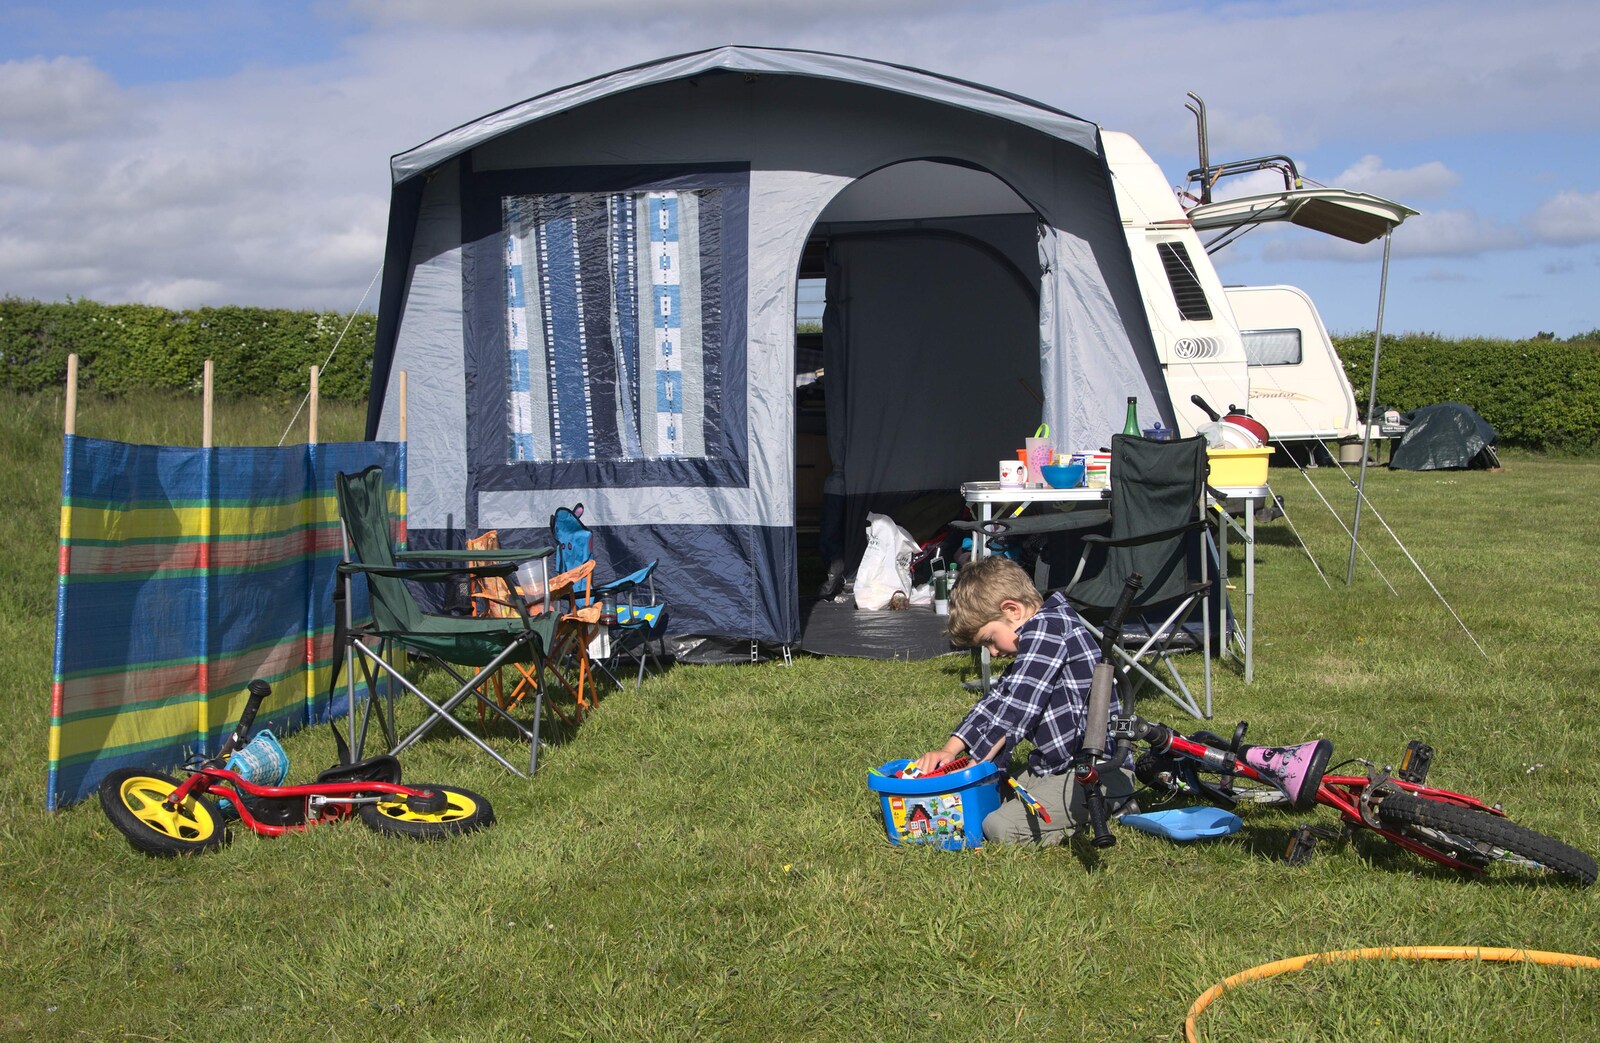 Fred does Lego from A Birthday Camping Trip, East Runton, North Norfolk - 26th May 2015